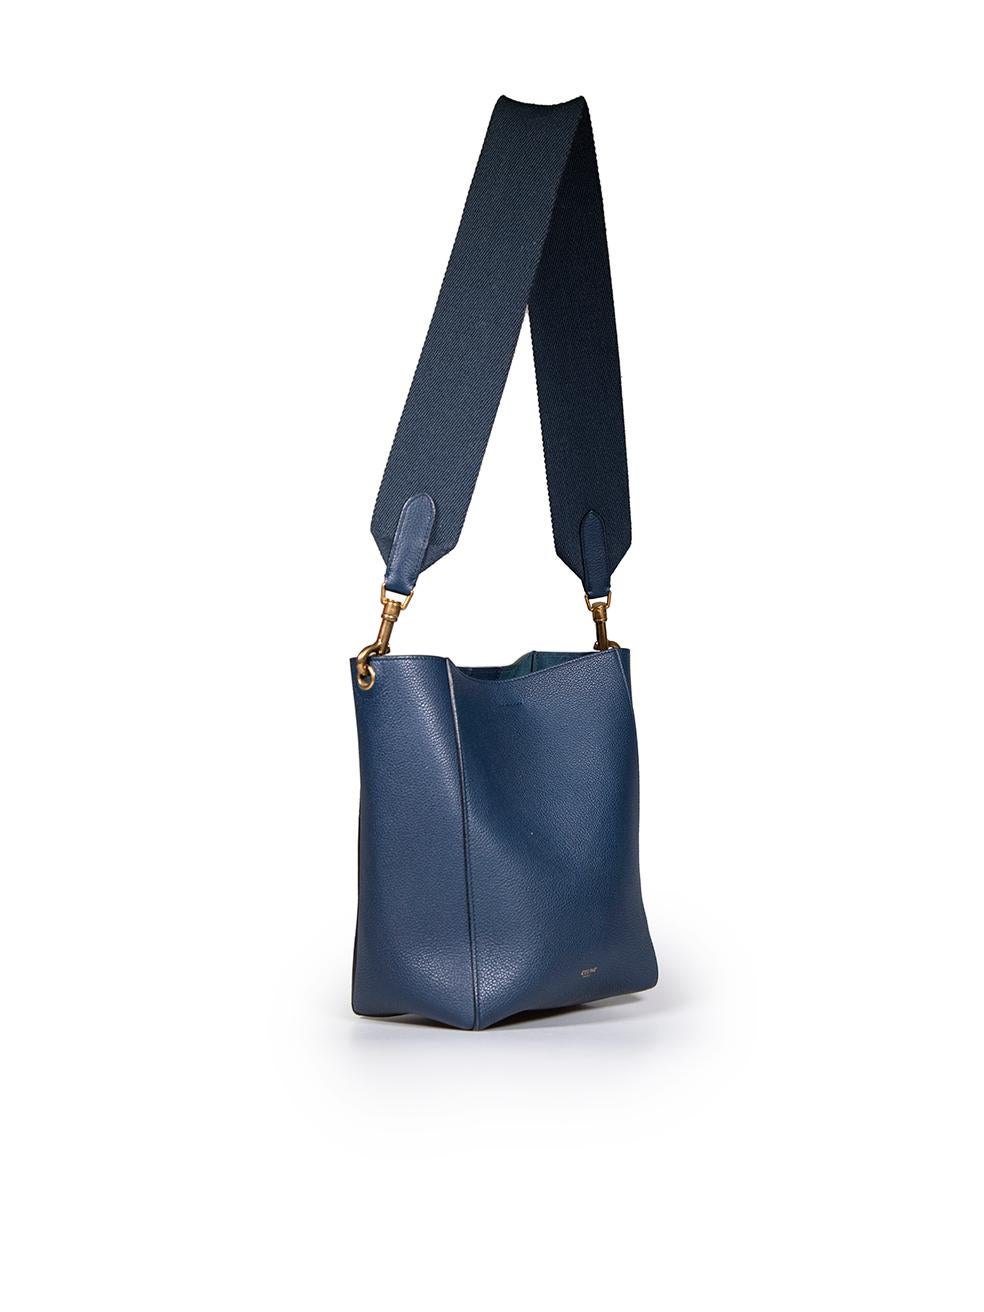 CONDITION is Very good. Minimal wear to bag is evident. Minimal wear to the base with abrasions to the leather on this used Céline designer resale item.
 
 
 
 Details
 
 
 Model: Seau Sangle
 
 Navy
 
 Leather
 
 Medium bucket bag
 
 Gold tone